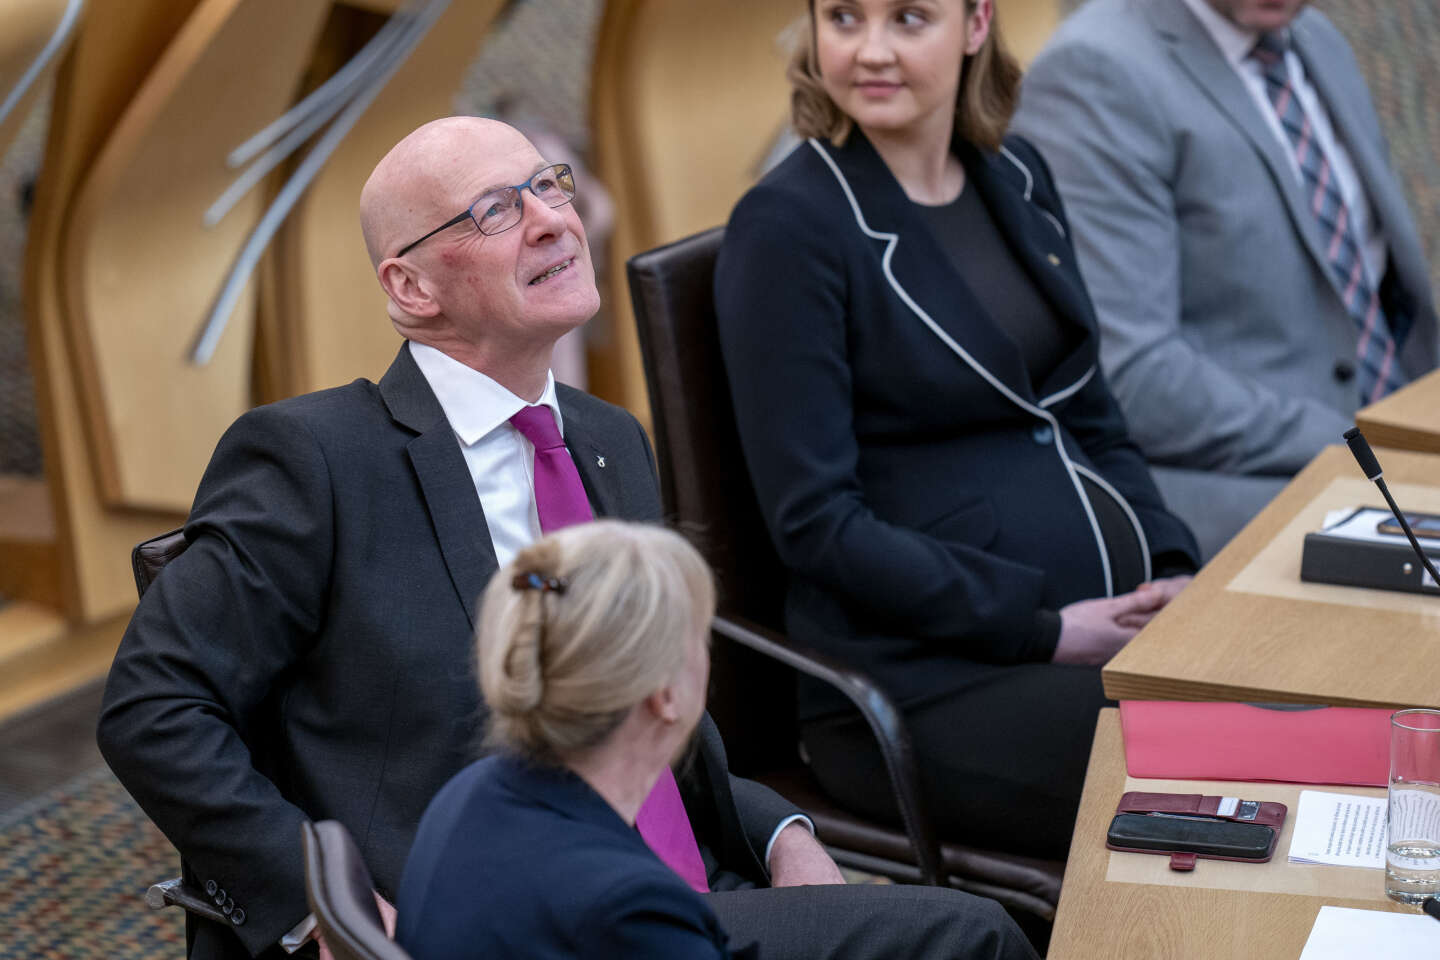 In Scotland, it was not surprising that independent John Swinney was elected Prime Minister